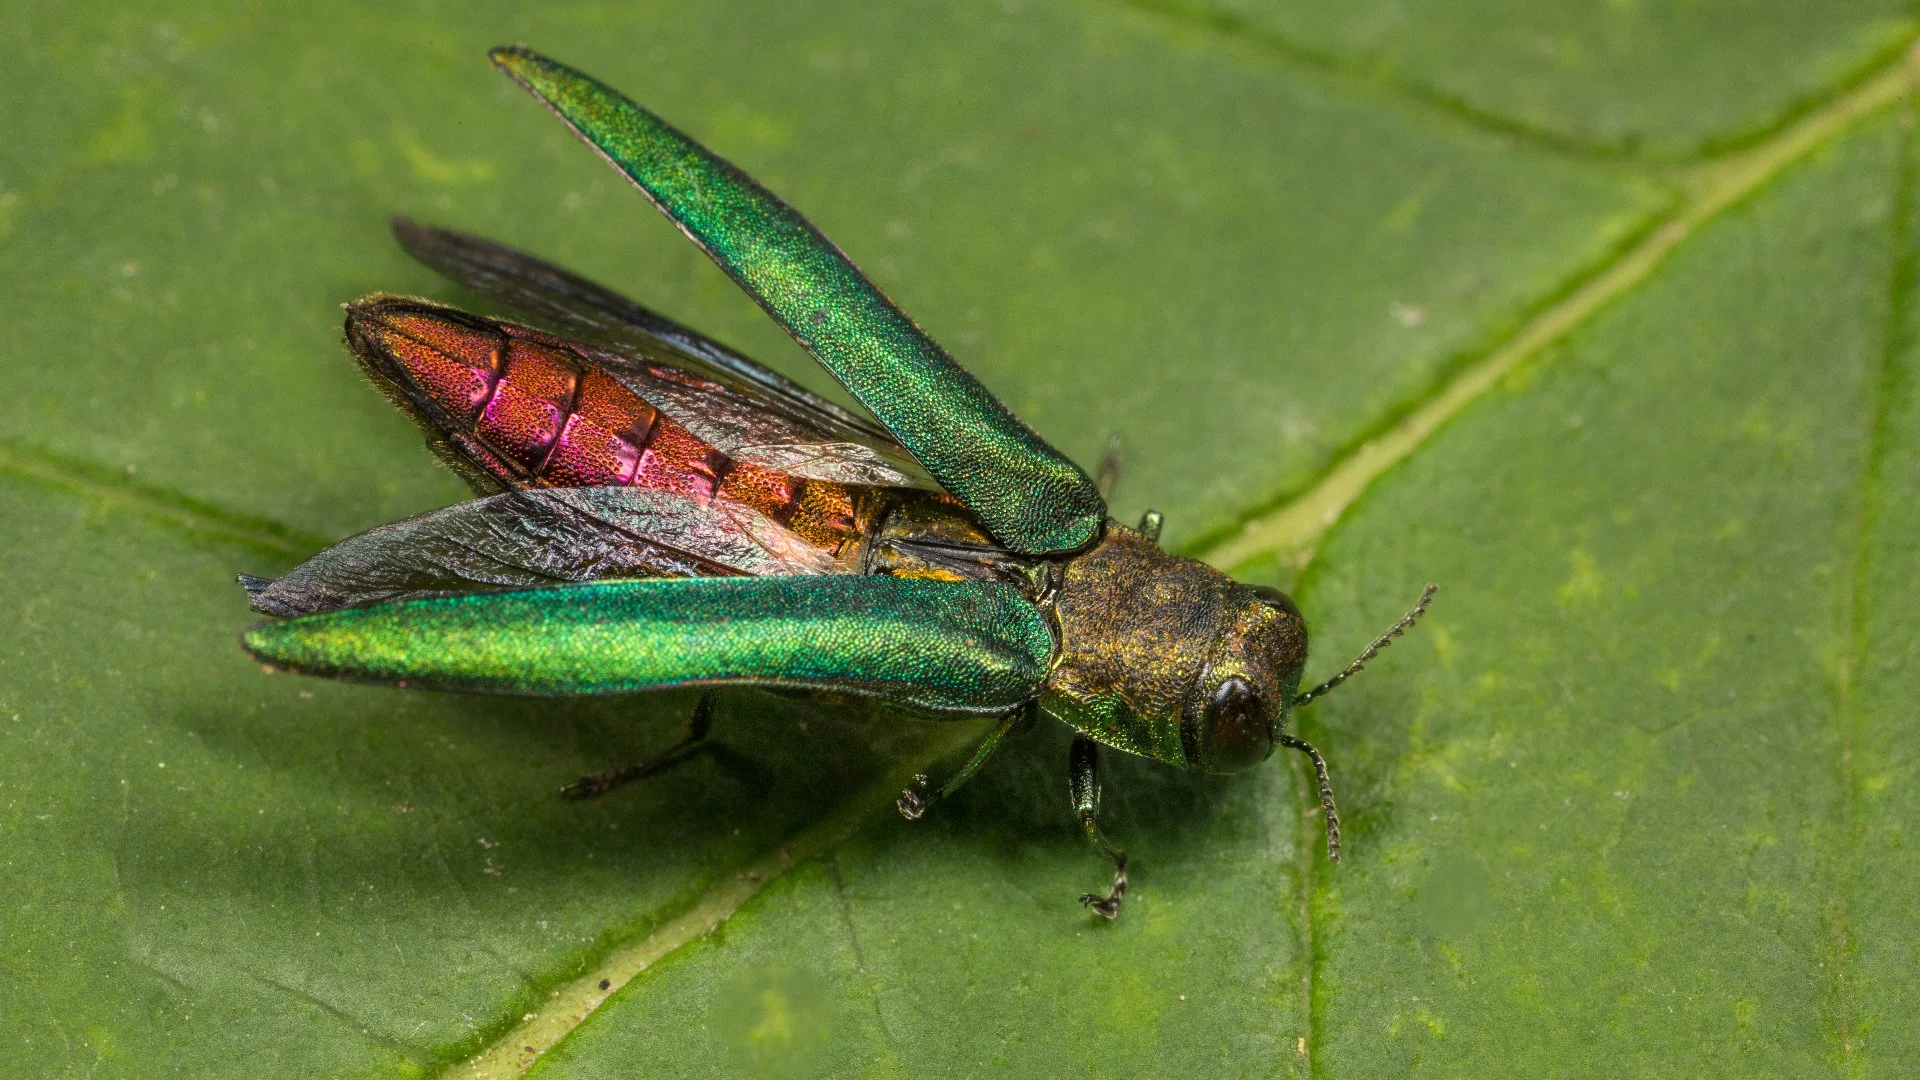 Emerald Ash Borers - What Are These Tree Insects & What's the Fuss About?